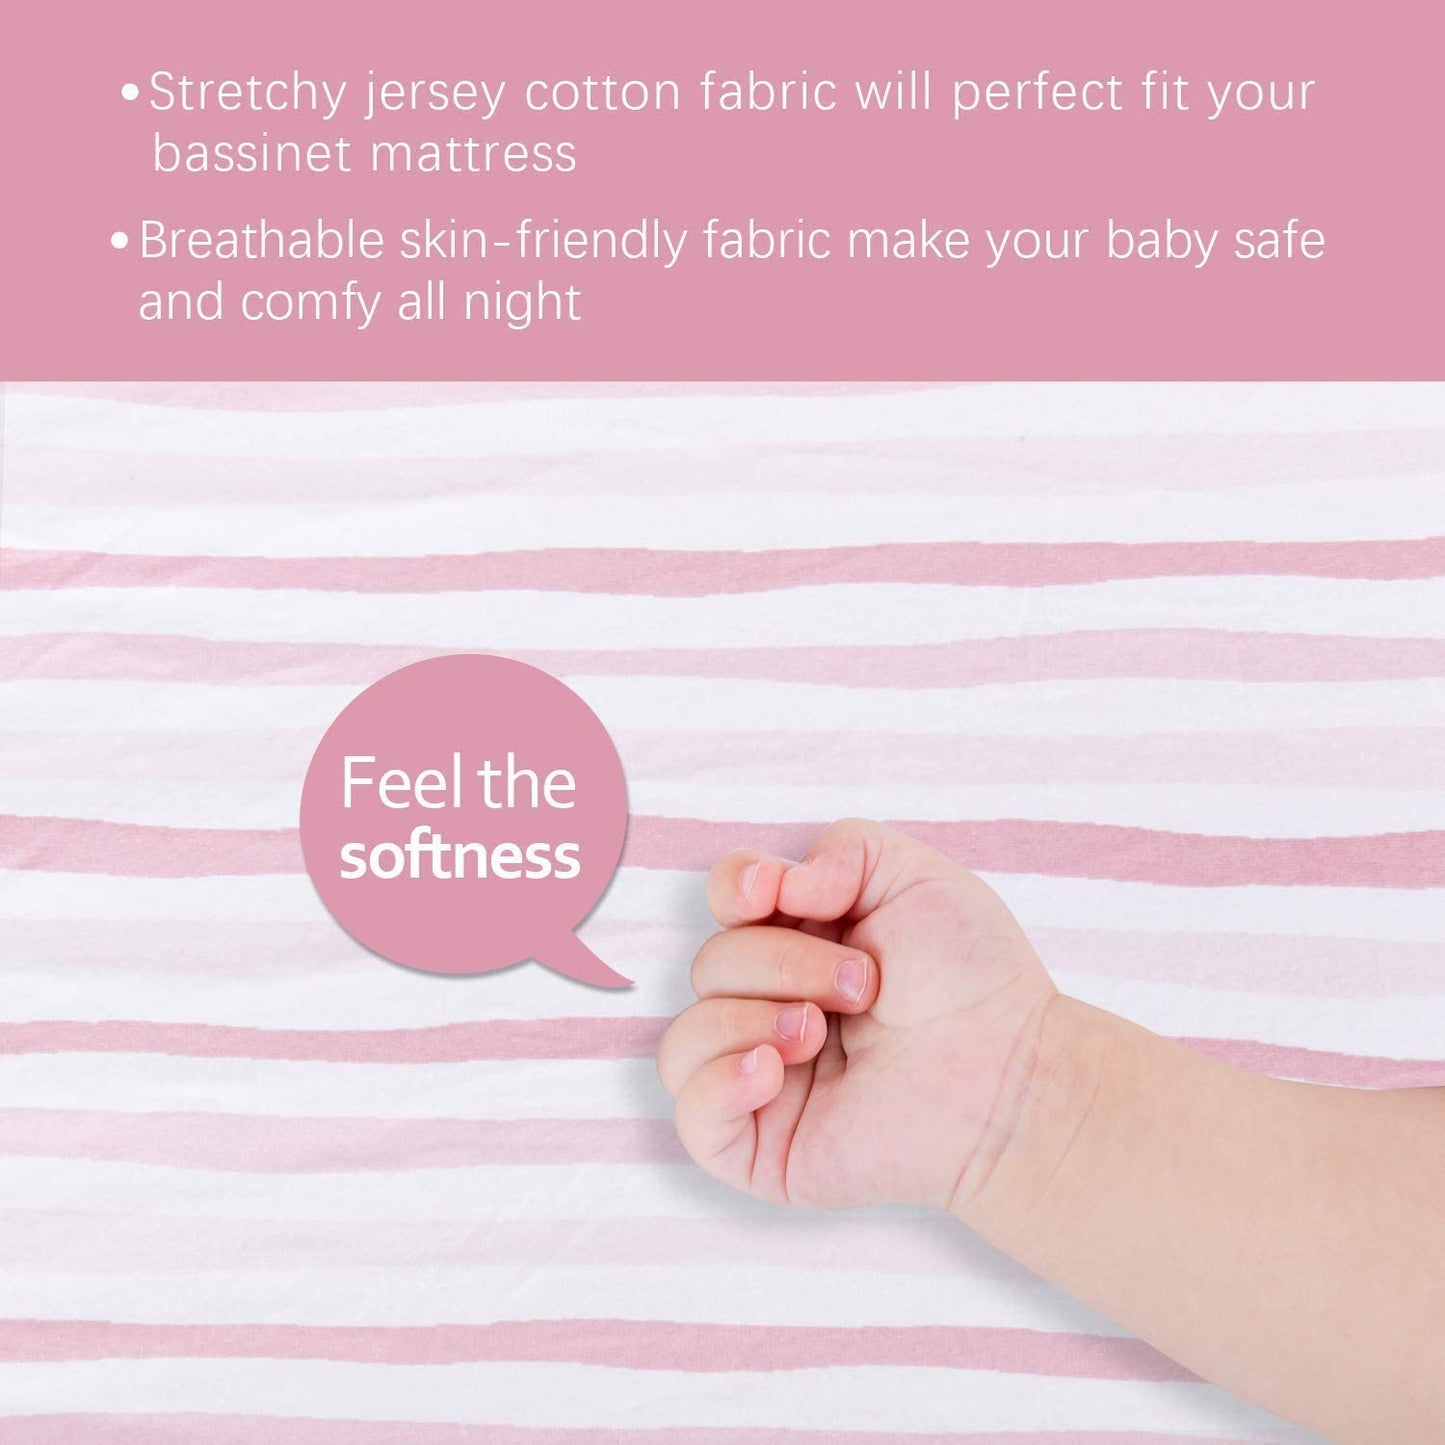 Bassinet Sheets - Fit AMKE Baby Bassinets (19"X33"), 2 Pack, 100% Jersey Cotton